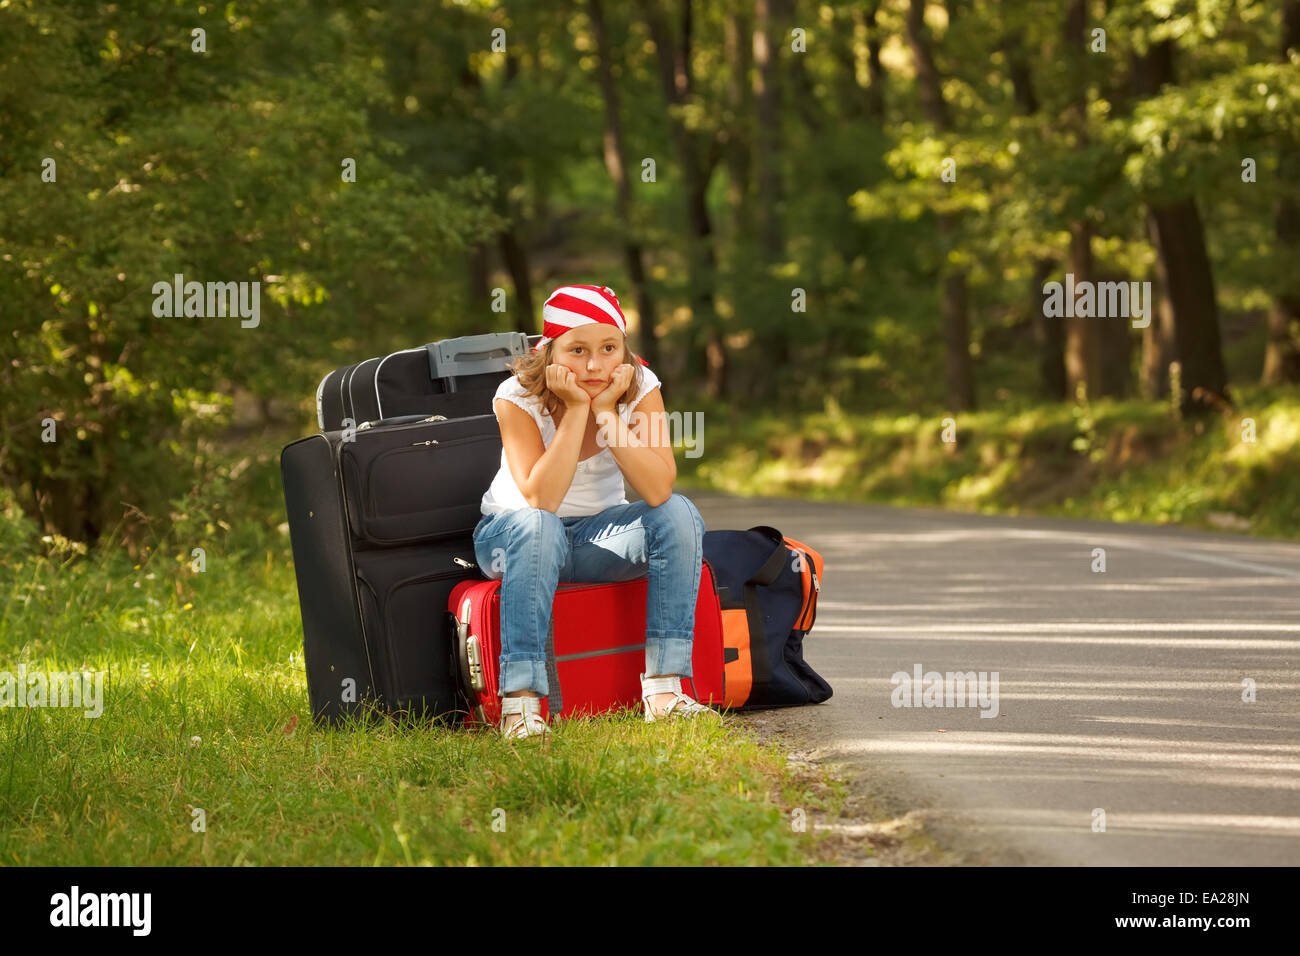 Young hitch-hiker girl standing on road side afternoon with bags Stock Photo